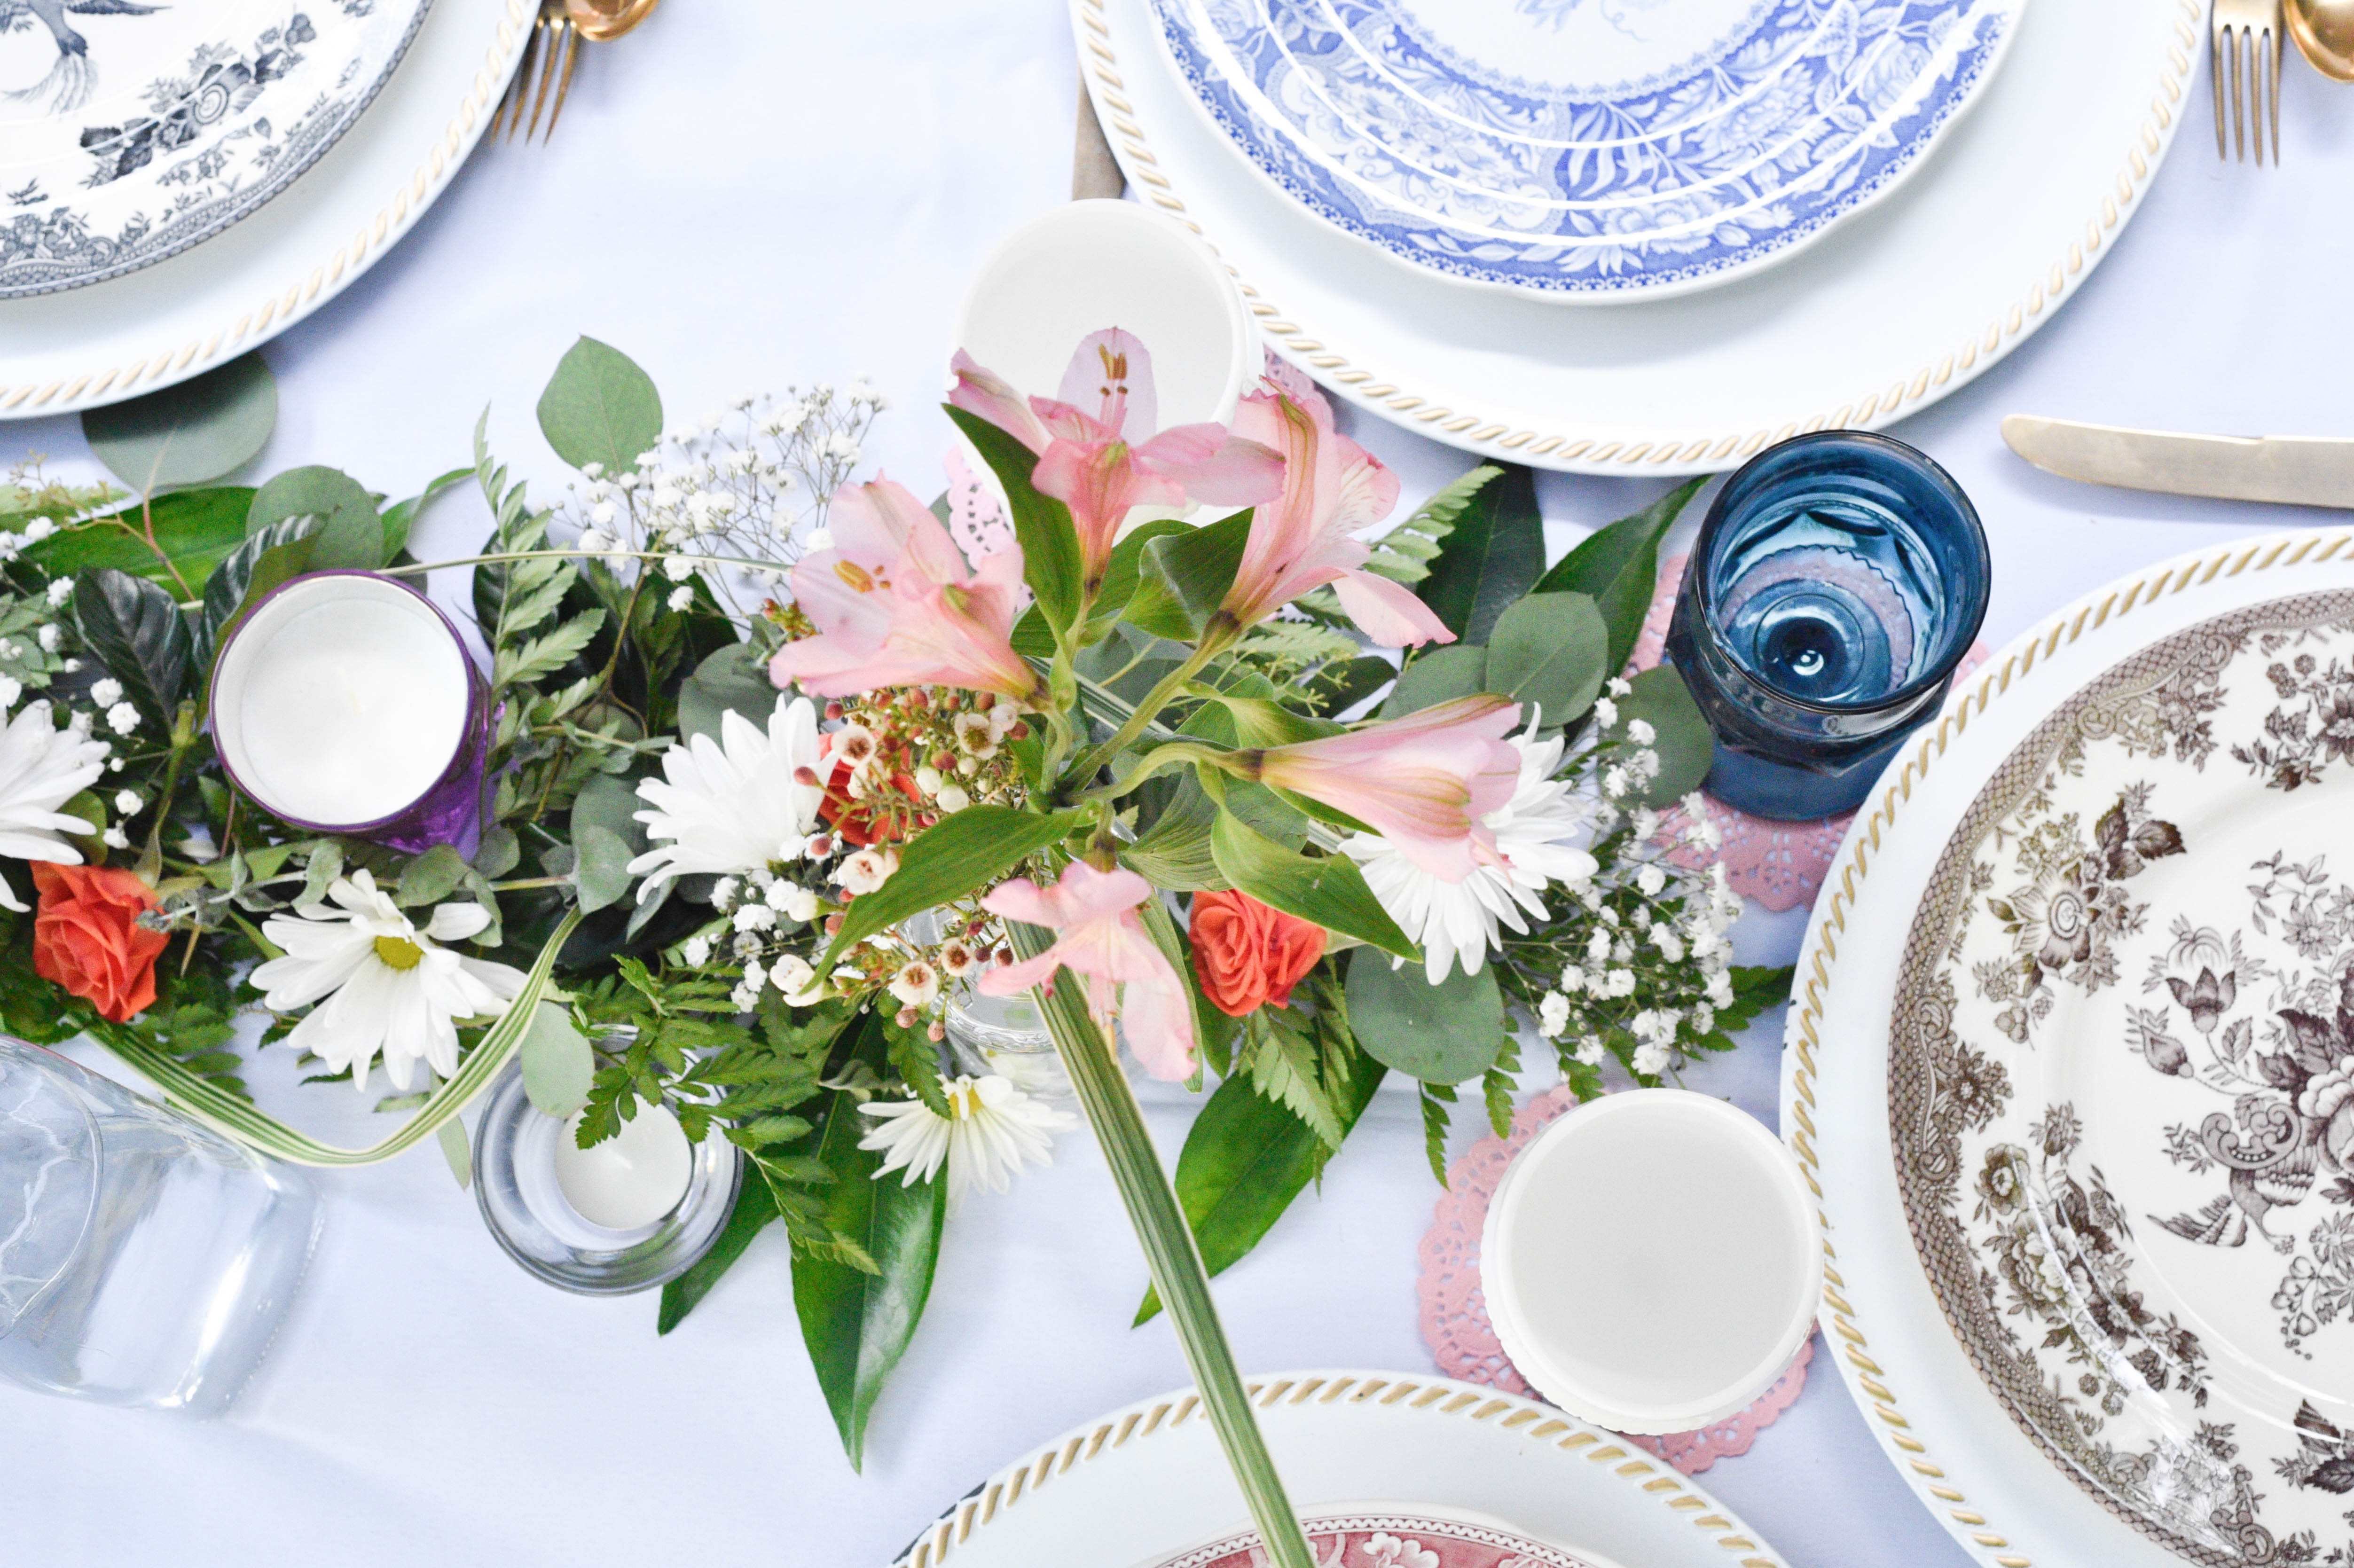 Perfect Summer Table Setting - 5 Essential Tips for Summer Entertaining